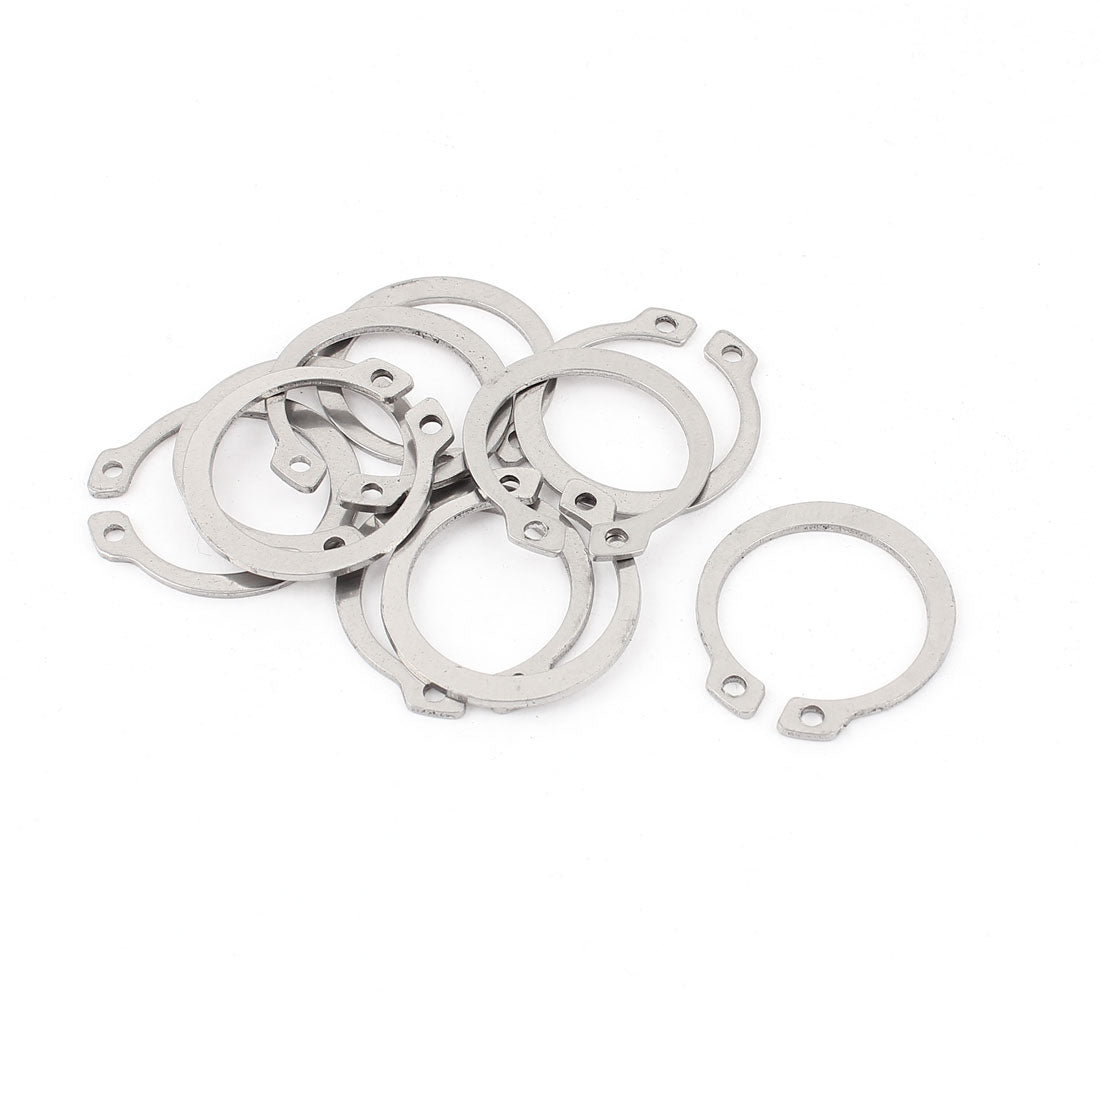 uxcell Uxcell 10pcs 304 Stainless Steel External Circlip Retaining Shaft Snap Rings 24mm